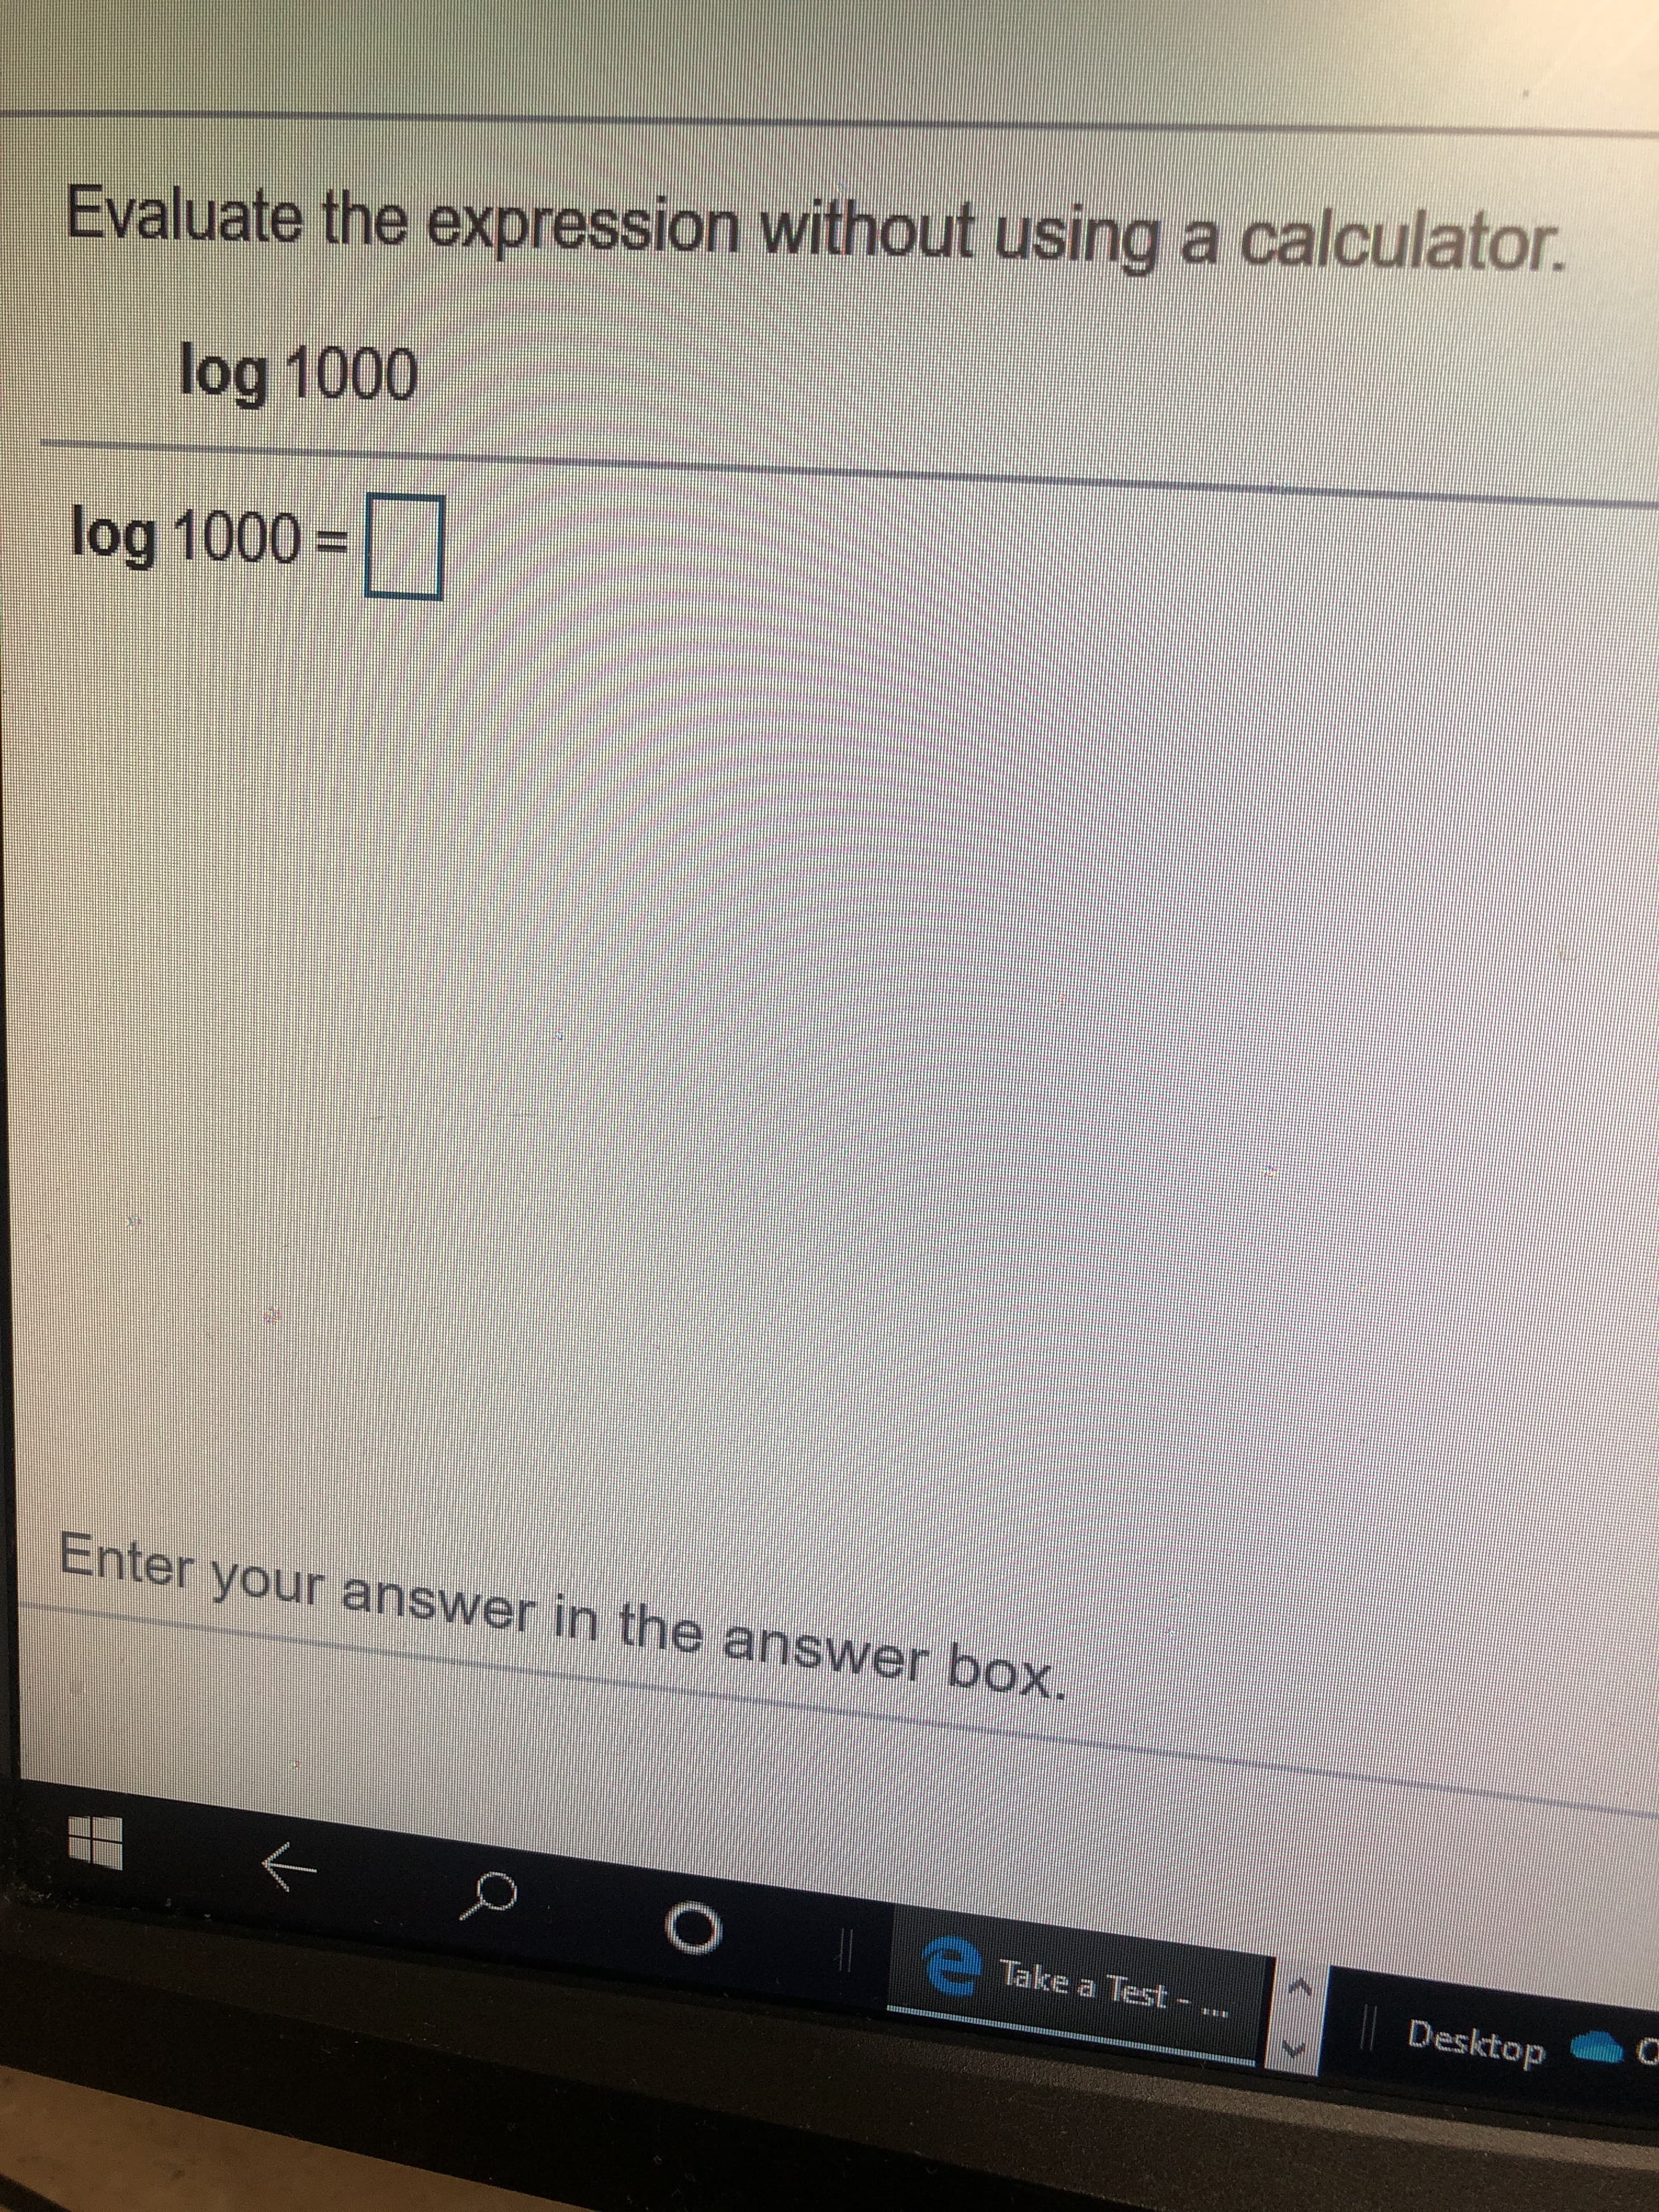 Evaluate the expression without using a calculator.
log 1000
log 1000
Enter your answer in the answer bOX.
O
eTake a Test -
Desktop
